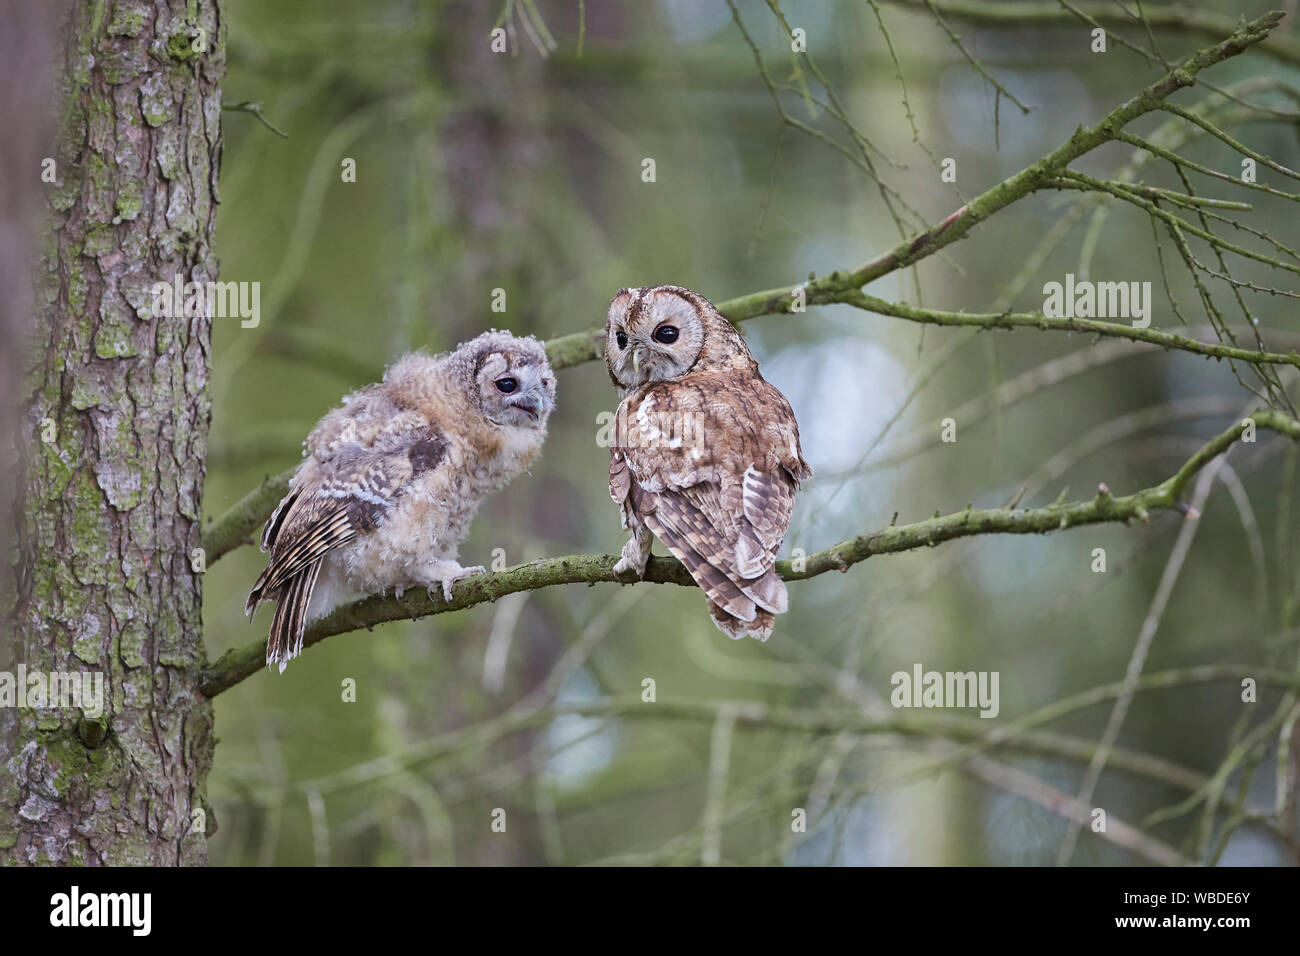 Tawny Owl, Strix aluco with chick that has started branching, UK Stock Photo